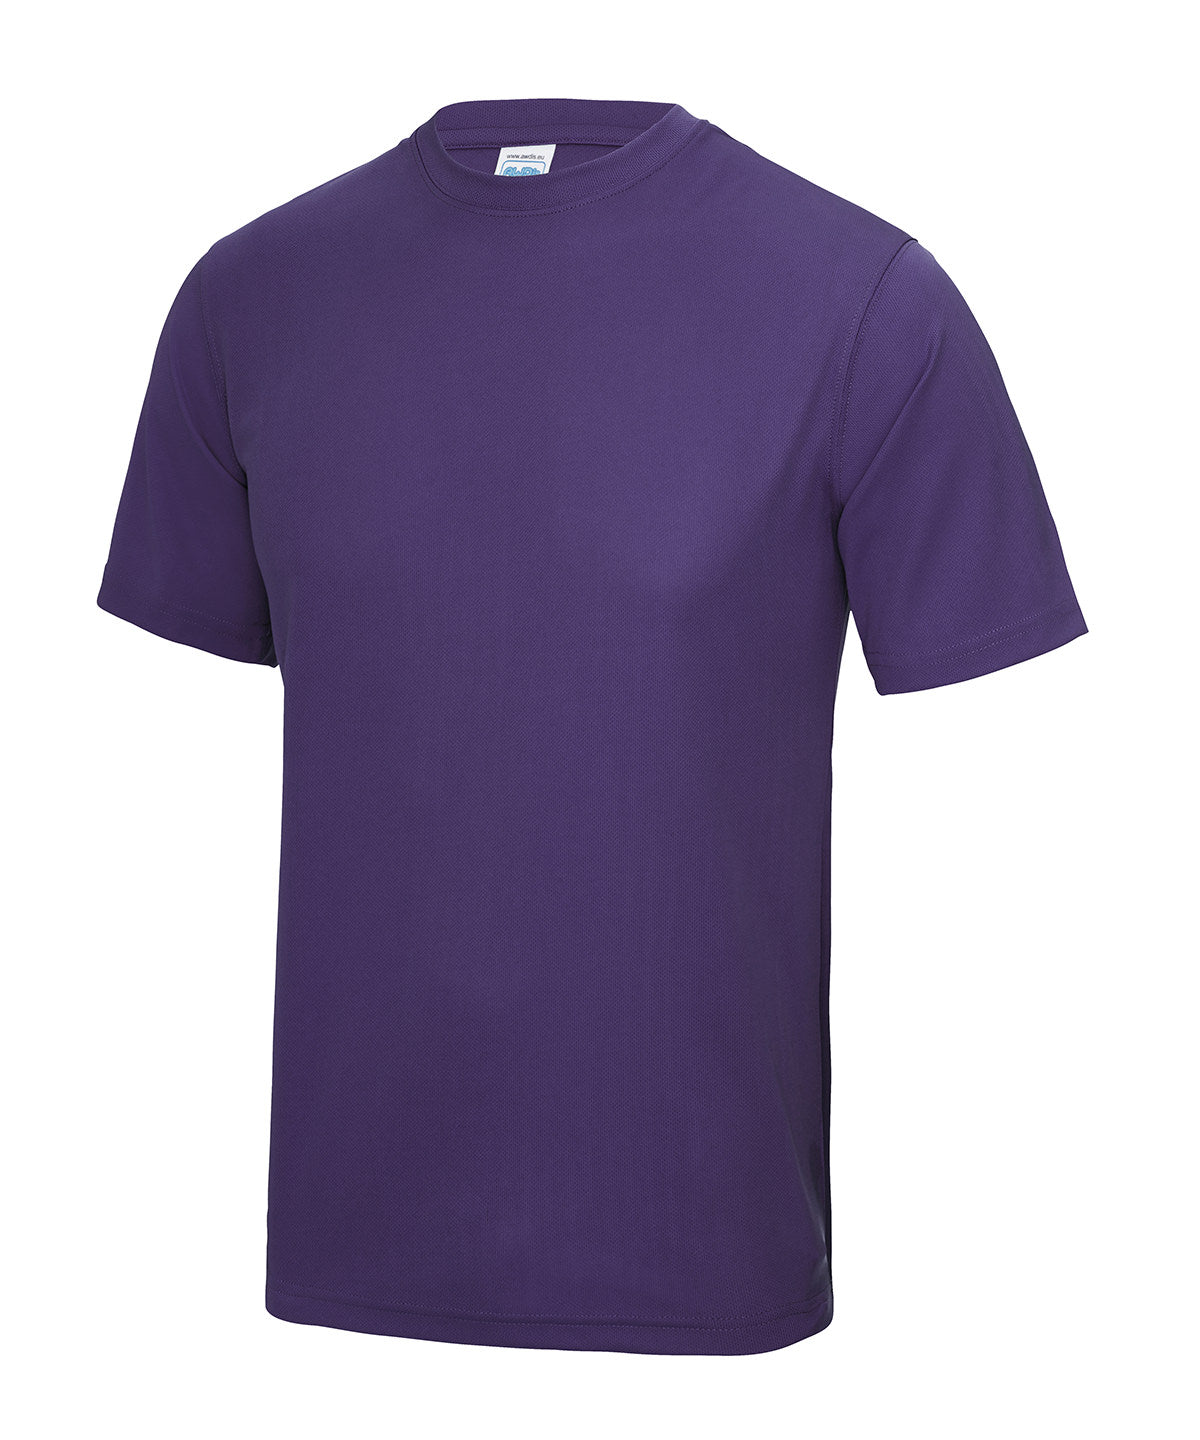 Personalised T-Shirts - Mid Purple AWDis Just Cool Kids cool T